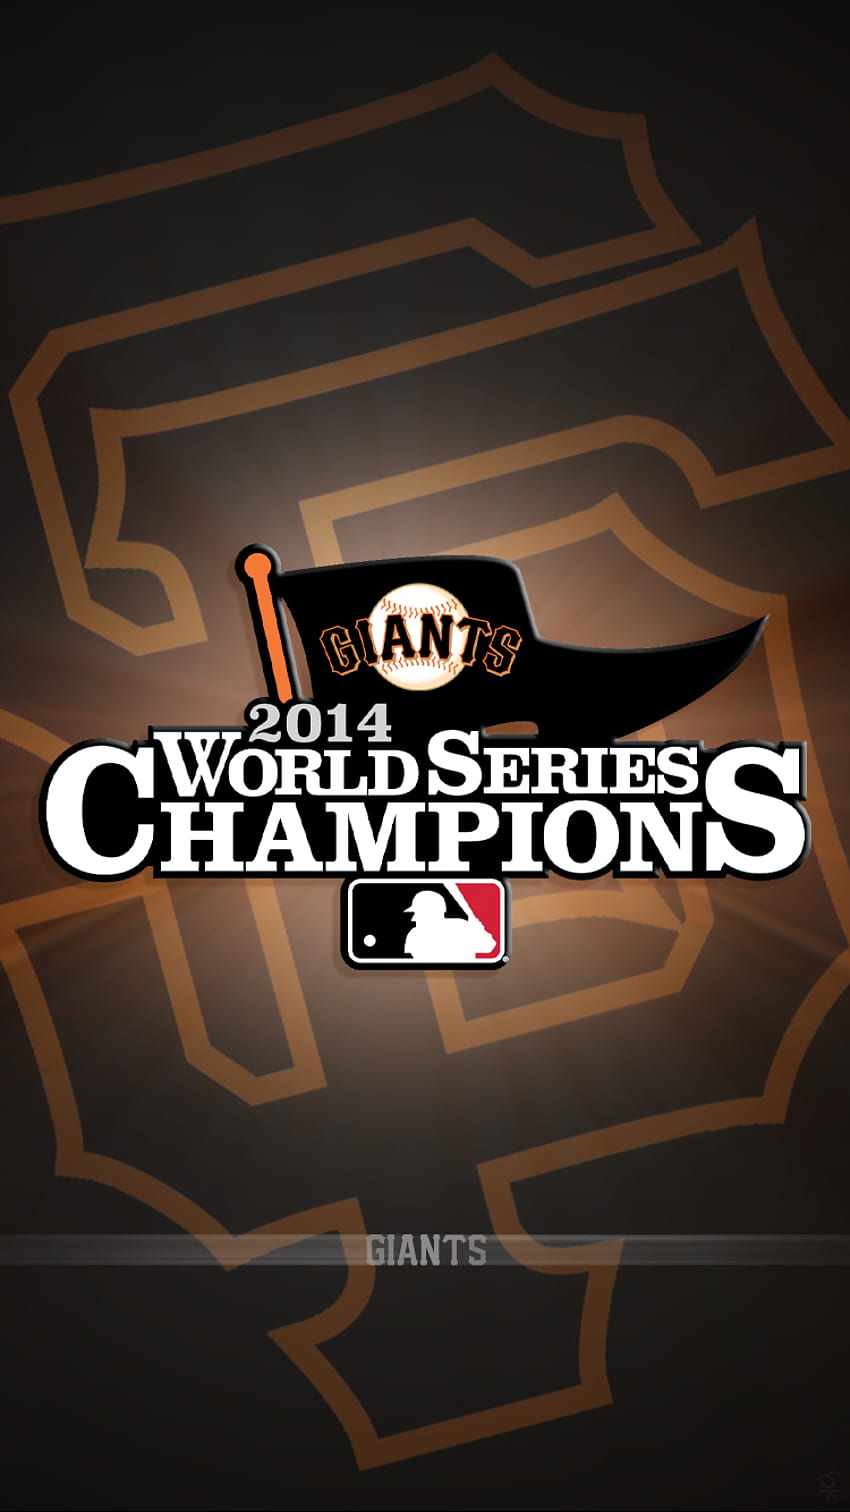 SF Giants MLB wallpaper by AlamRodriguez  Download on ZEDGE  79ff